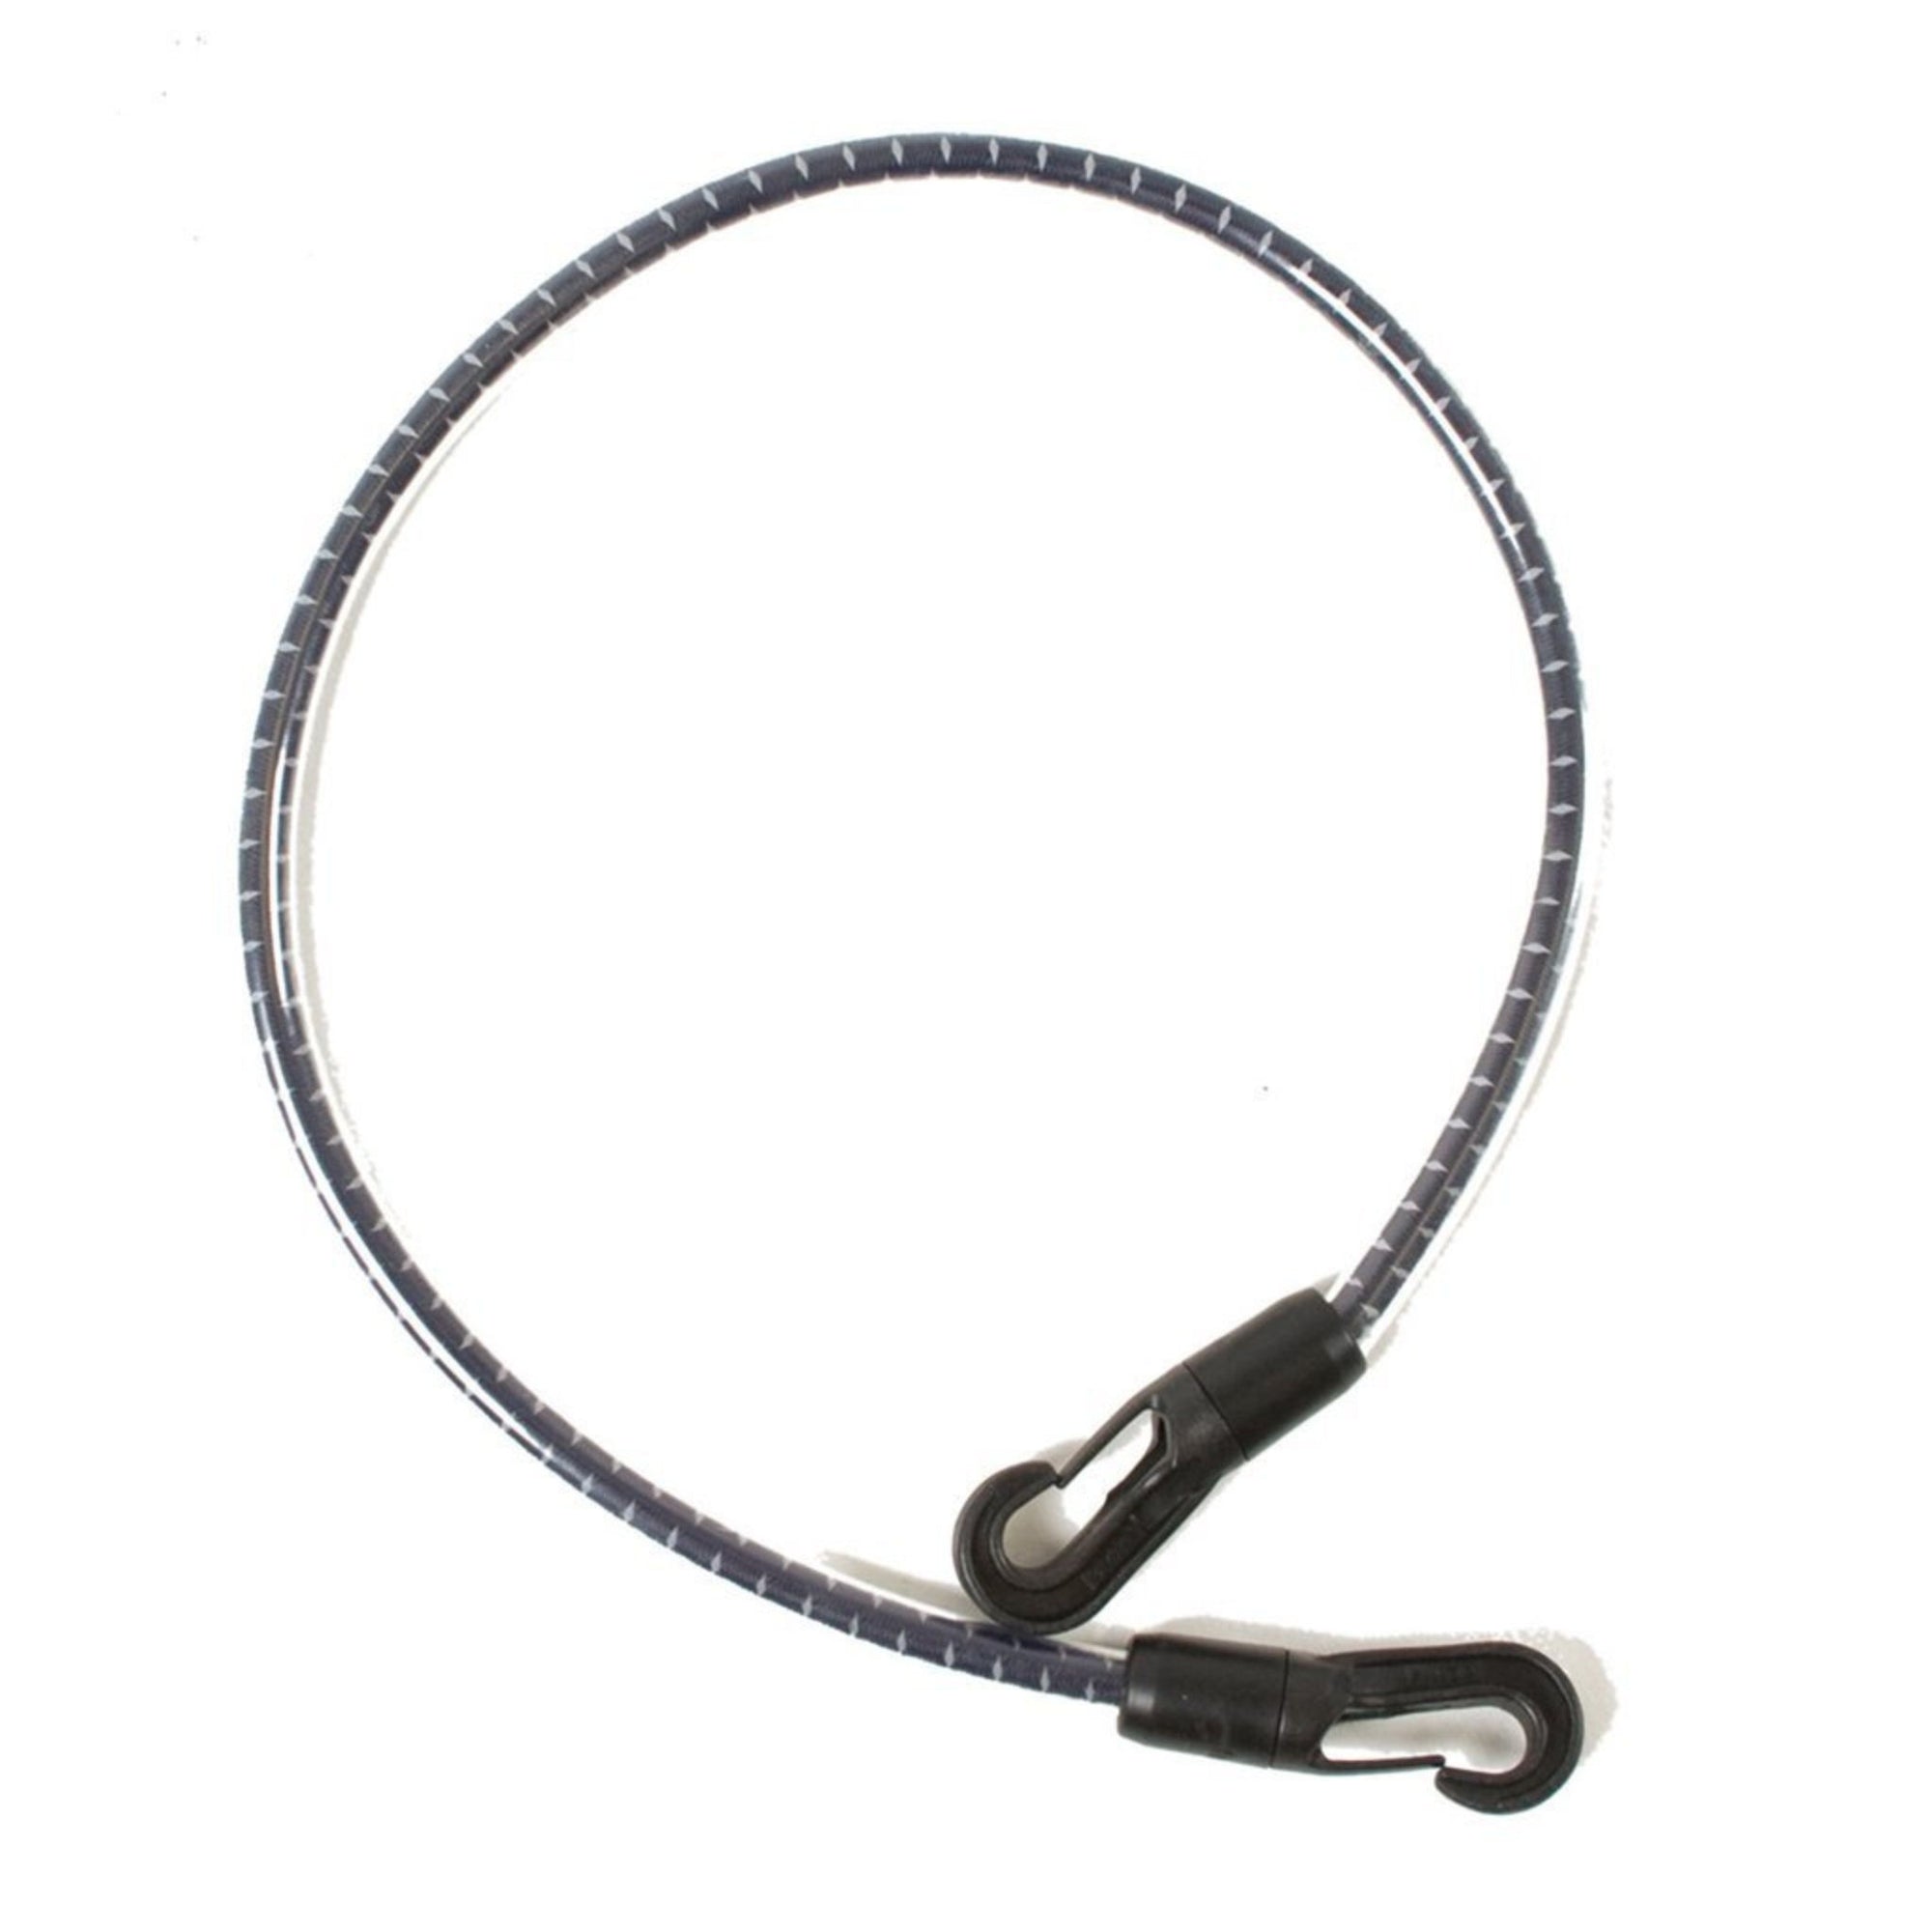 Black elastic tail cord with black plastic clips.